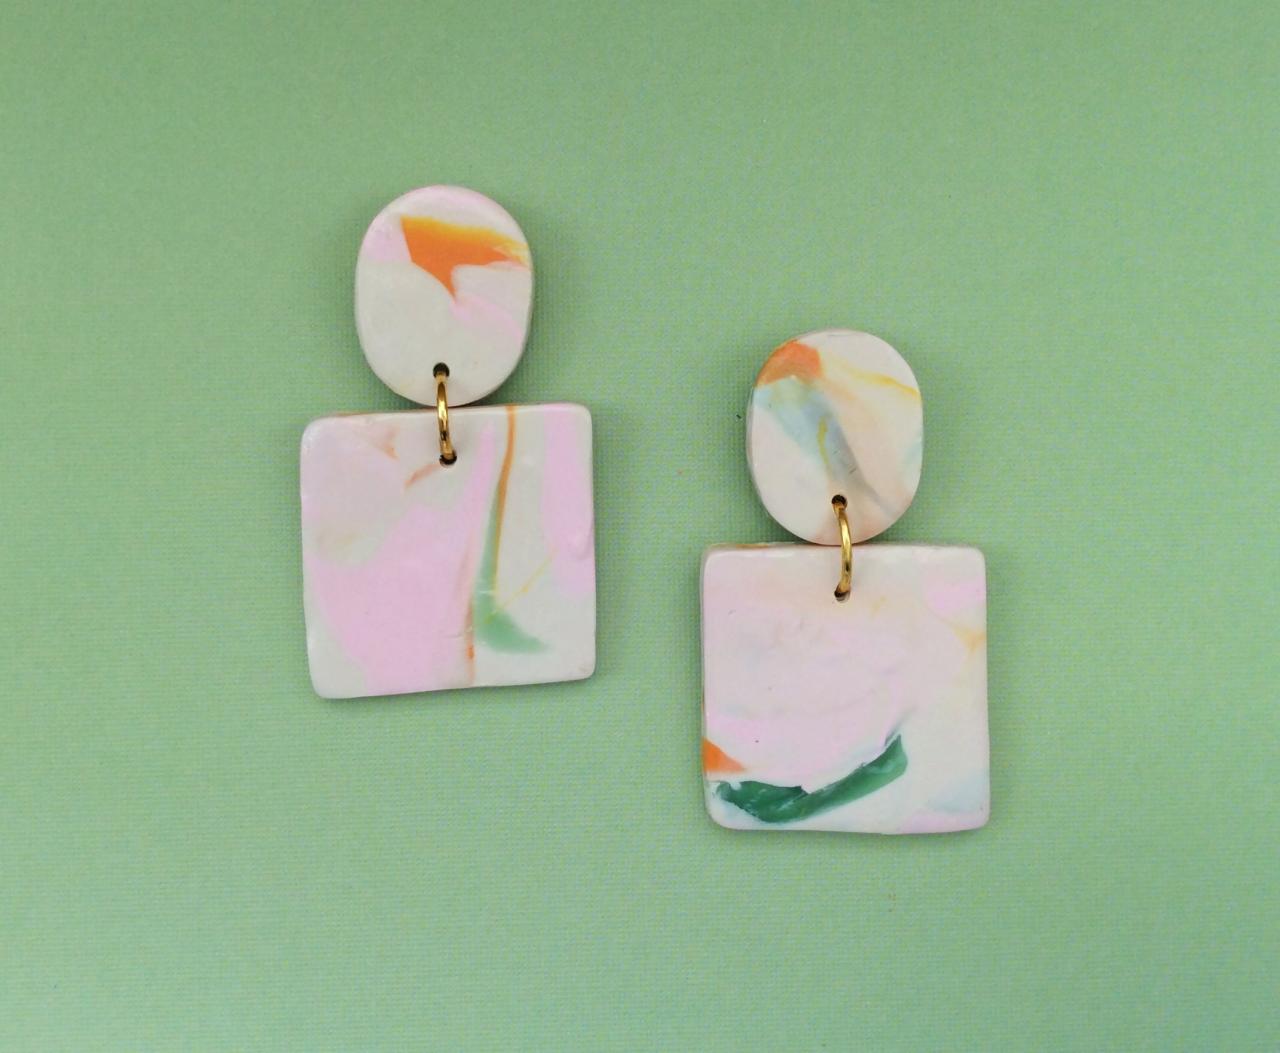 Abstract Square Polymer Clay Earrings | Unique Polymer Clay Statement Earrings